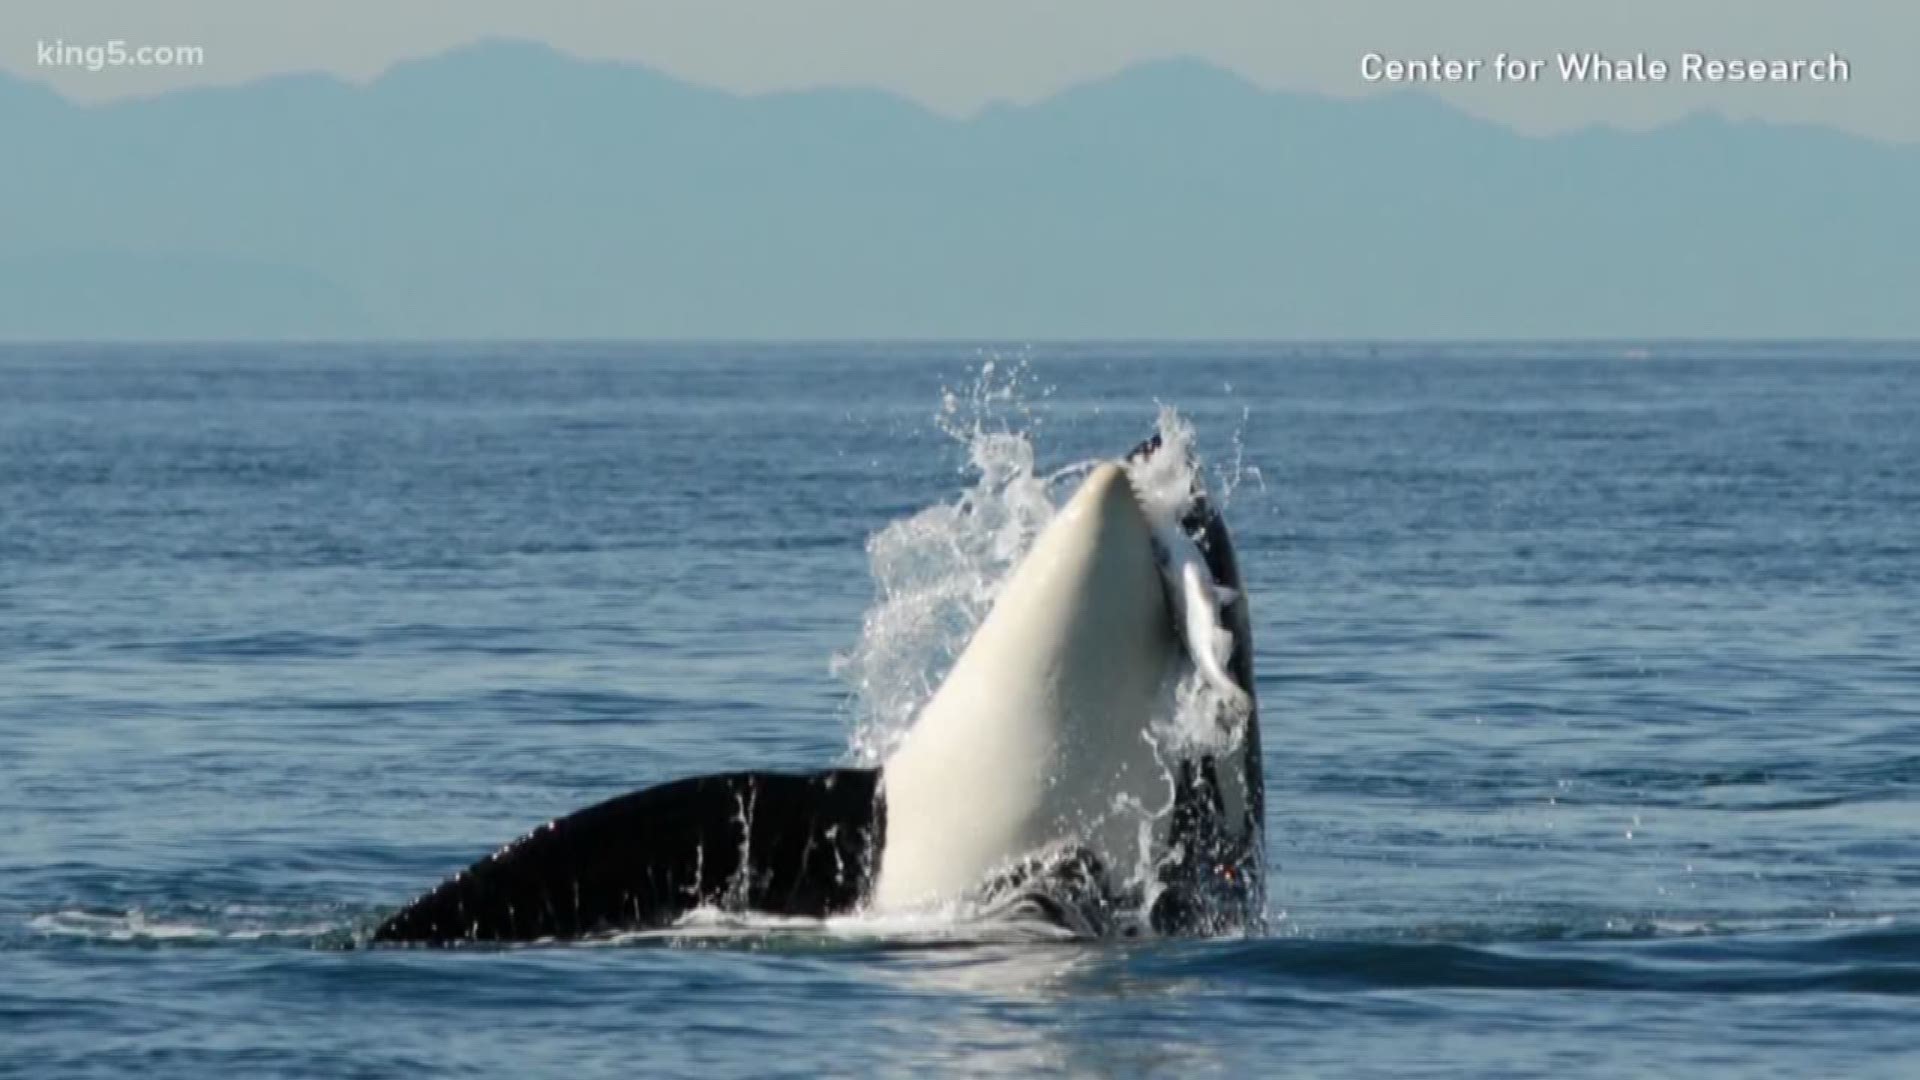 Scientists agree the Southern Resident killer whales don't have enough to eat because their favorite prey, Chinook salmon, are also disappearing.
But it's also hard for the whales to find the salmon that remain because our urban waters are so noisy. KING 5's Alison Morrow reports.